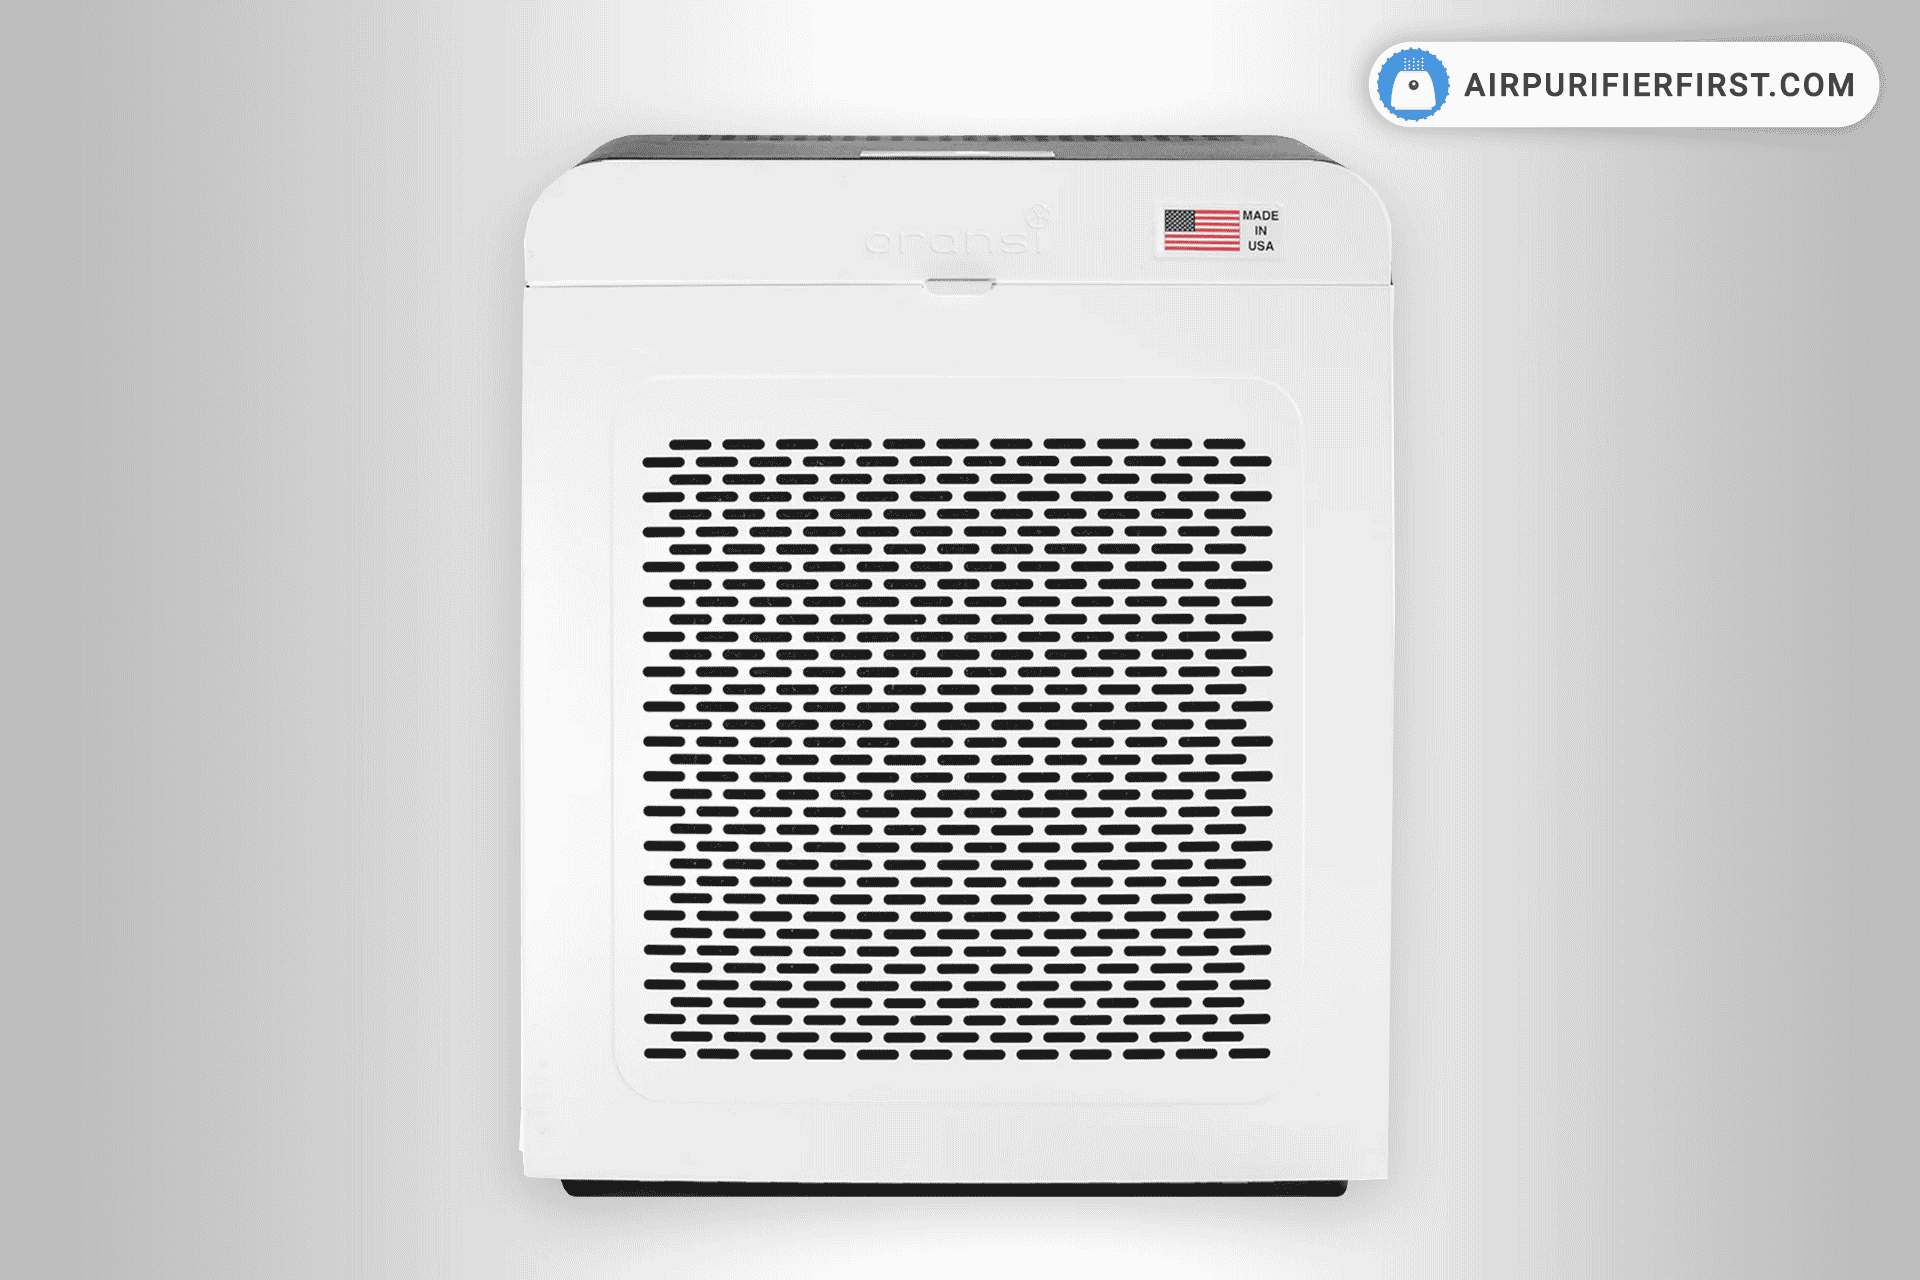 Oransi EJ120 - Best Air Purifier Made in the USA